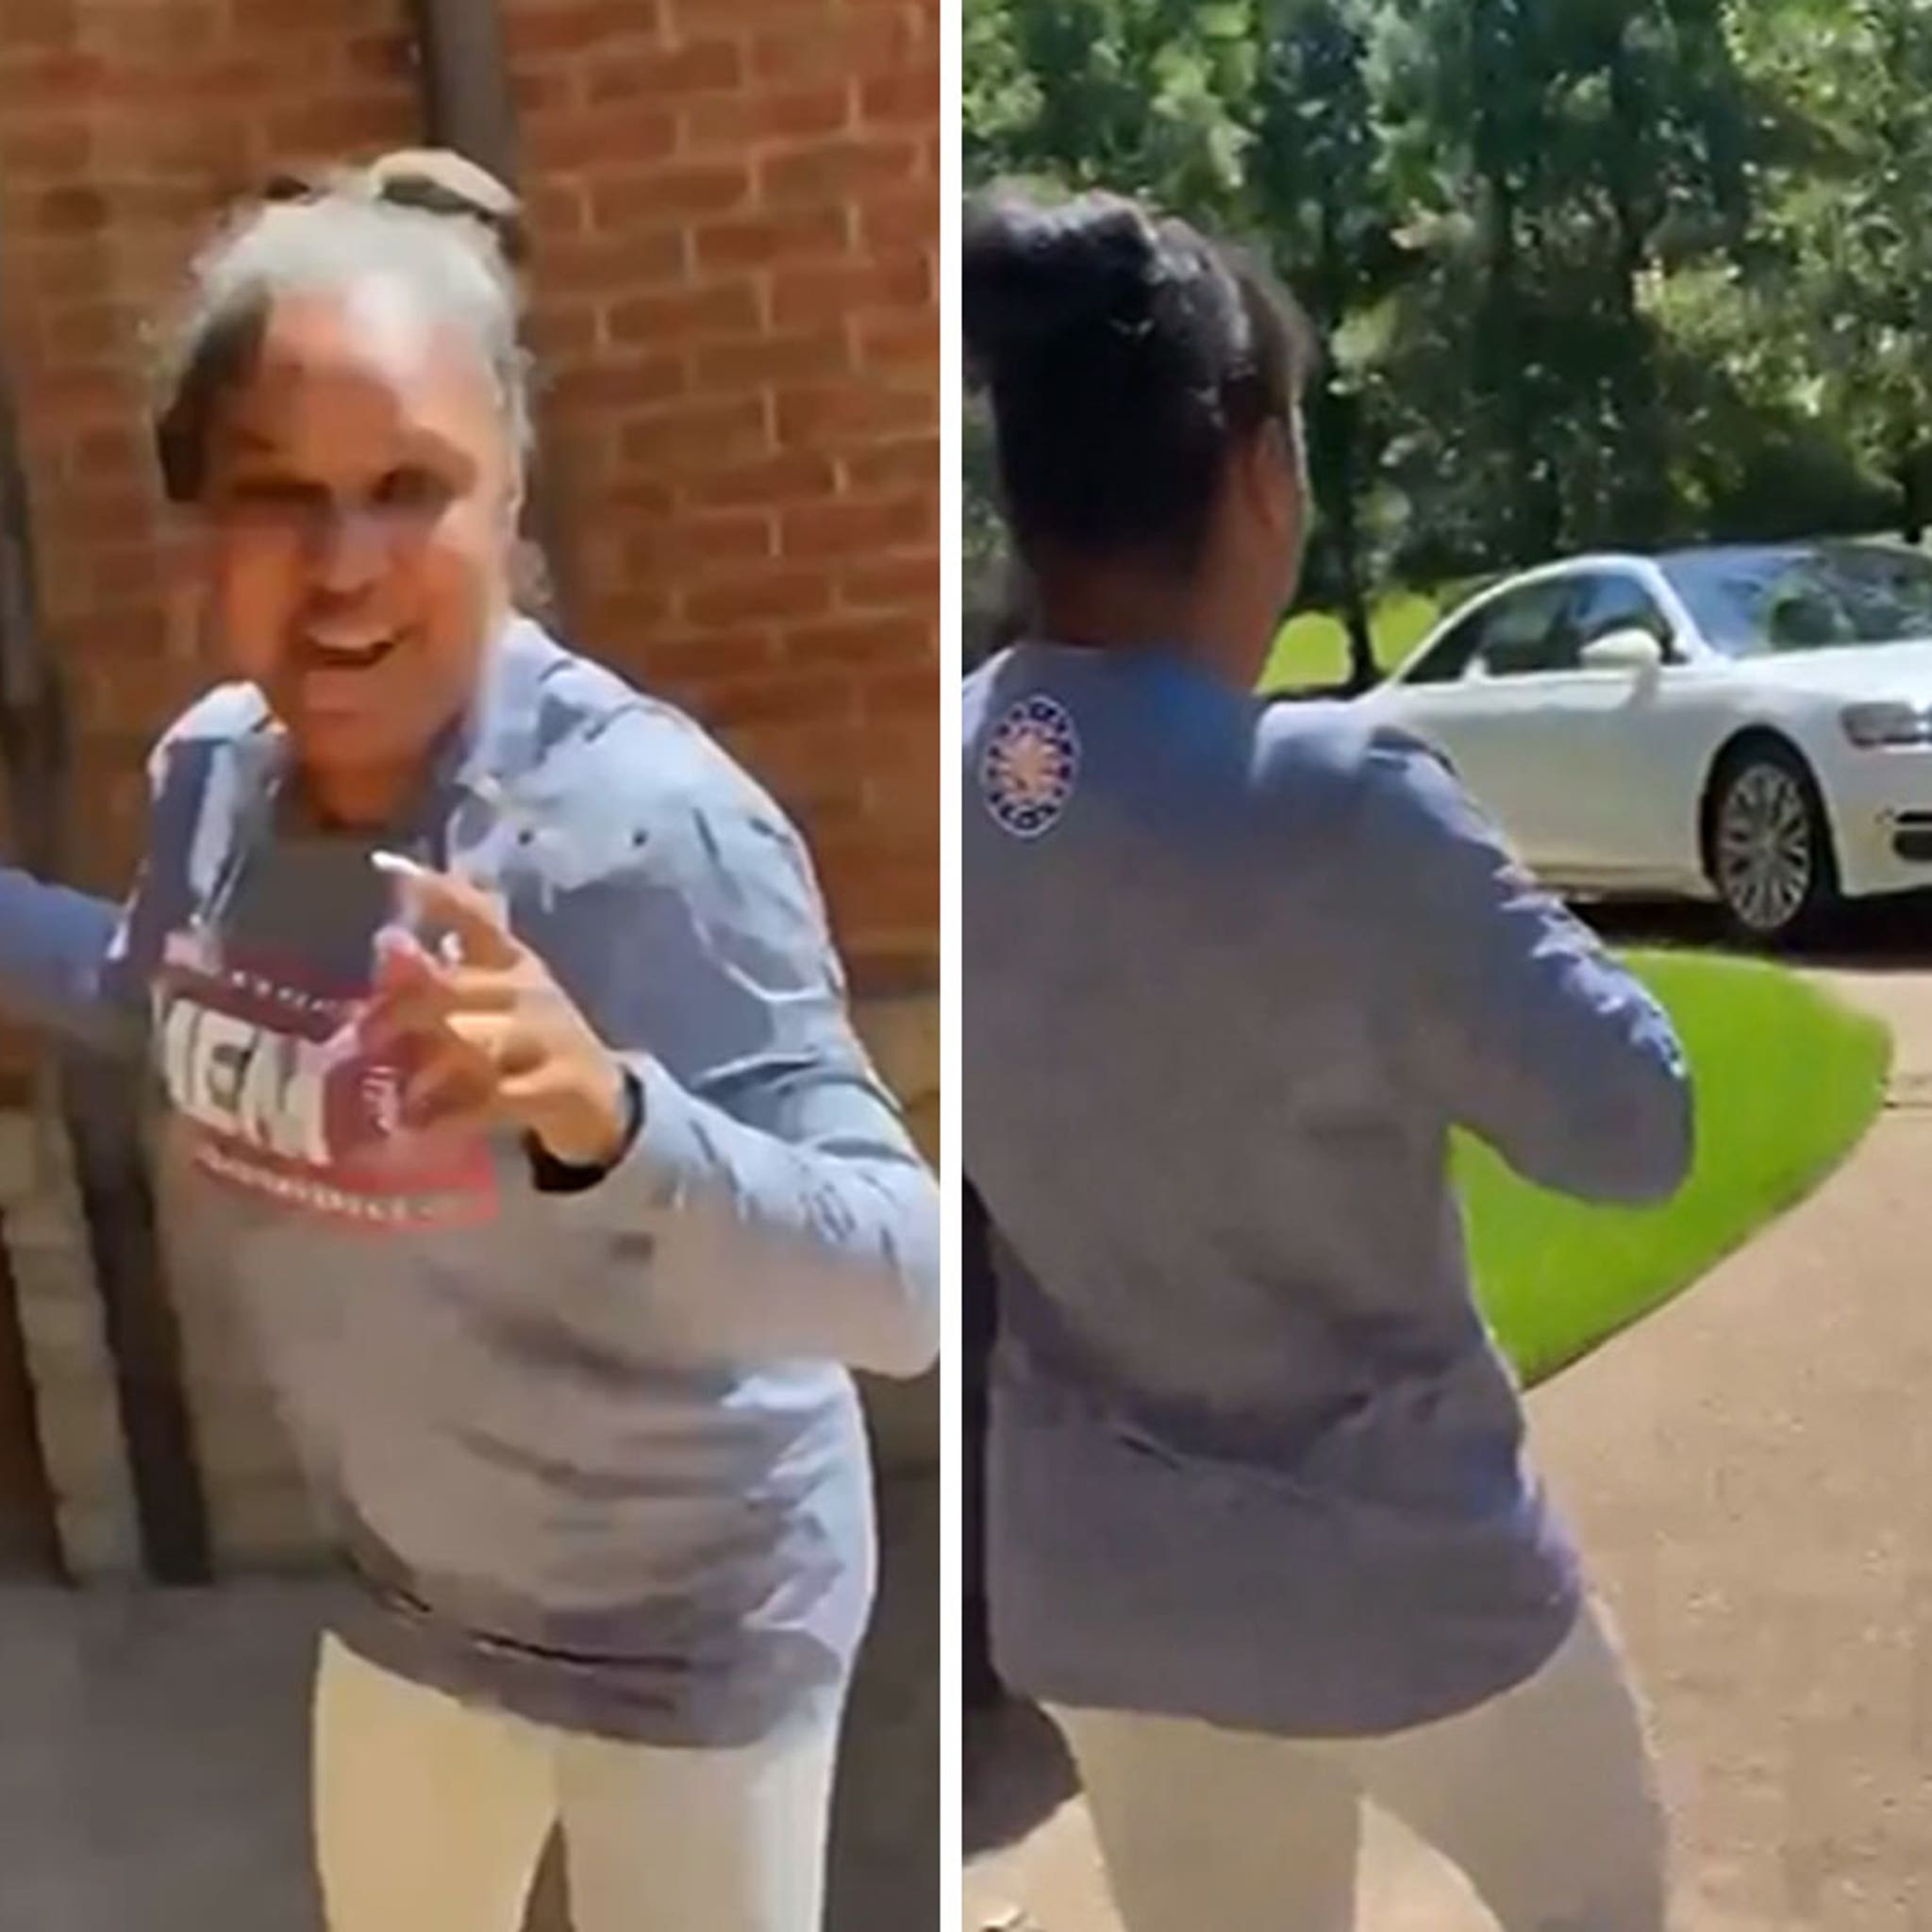 Ja Morant Surprises Mom With Incredible Gift While In NBA Bubble